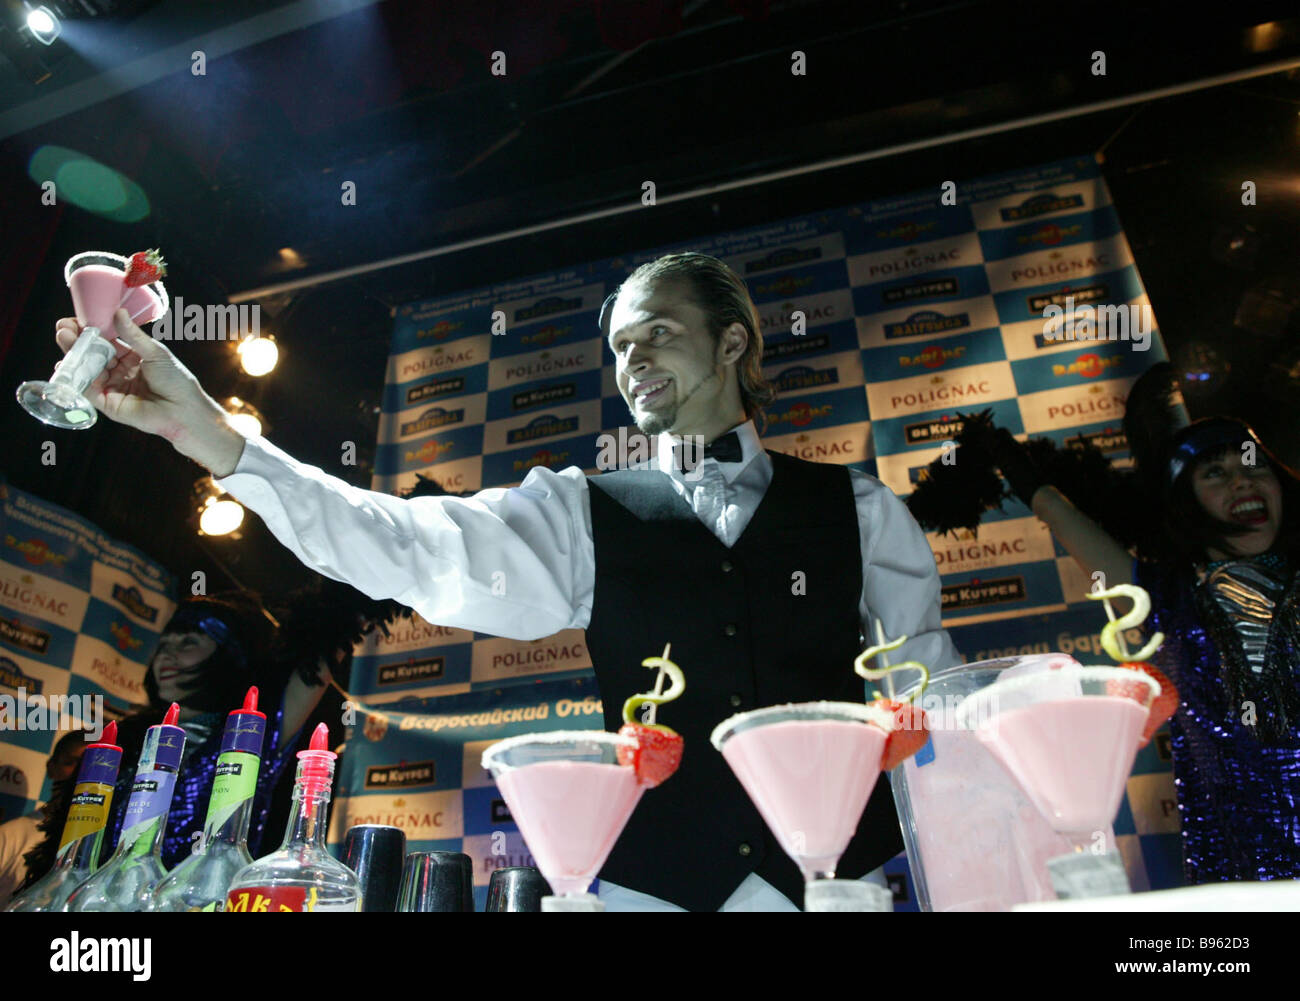 Alexander Radaman last year s world barman champion in free style at Russia s national qualification round of 2004 bar world Stock Photo